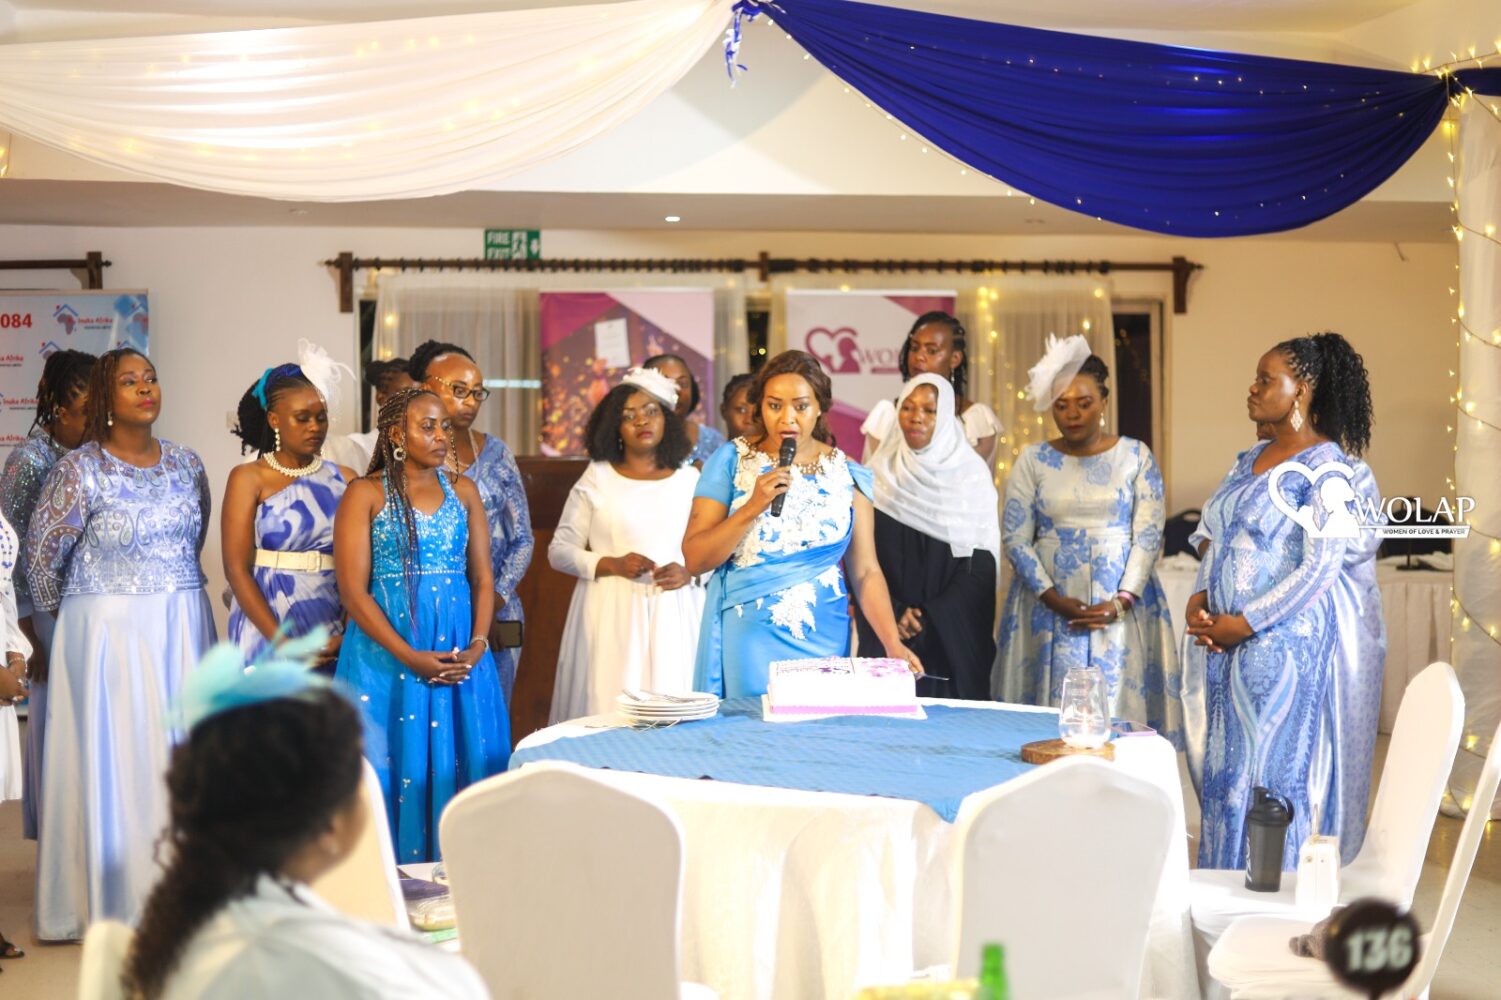 A church SACCO advocating for women’s rights by helping overcome femicide, GBV